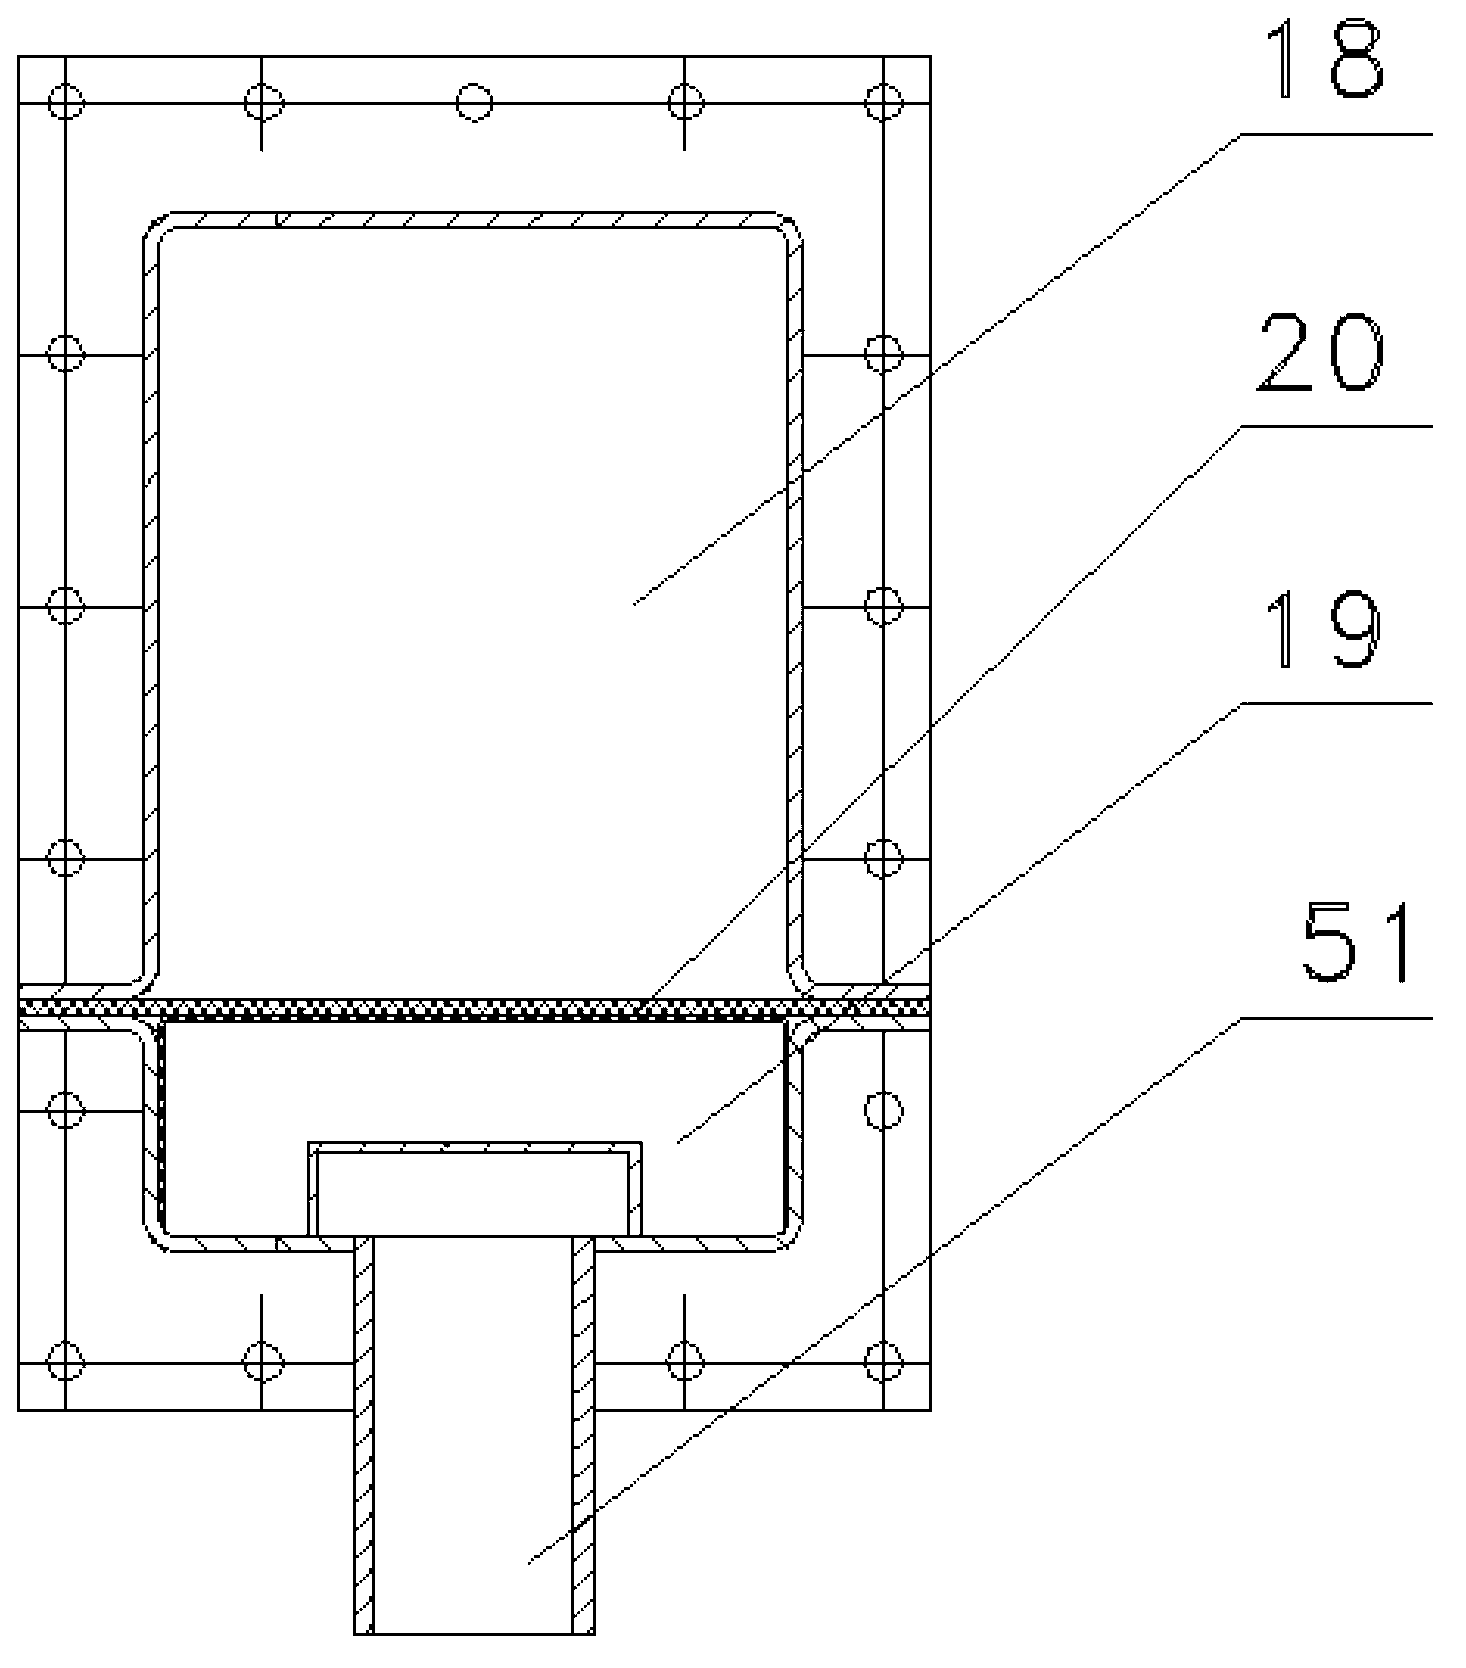 Desulfurized ash delivery device